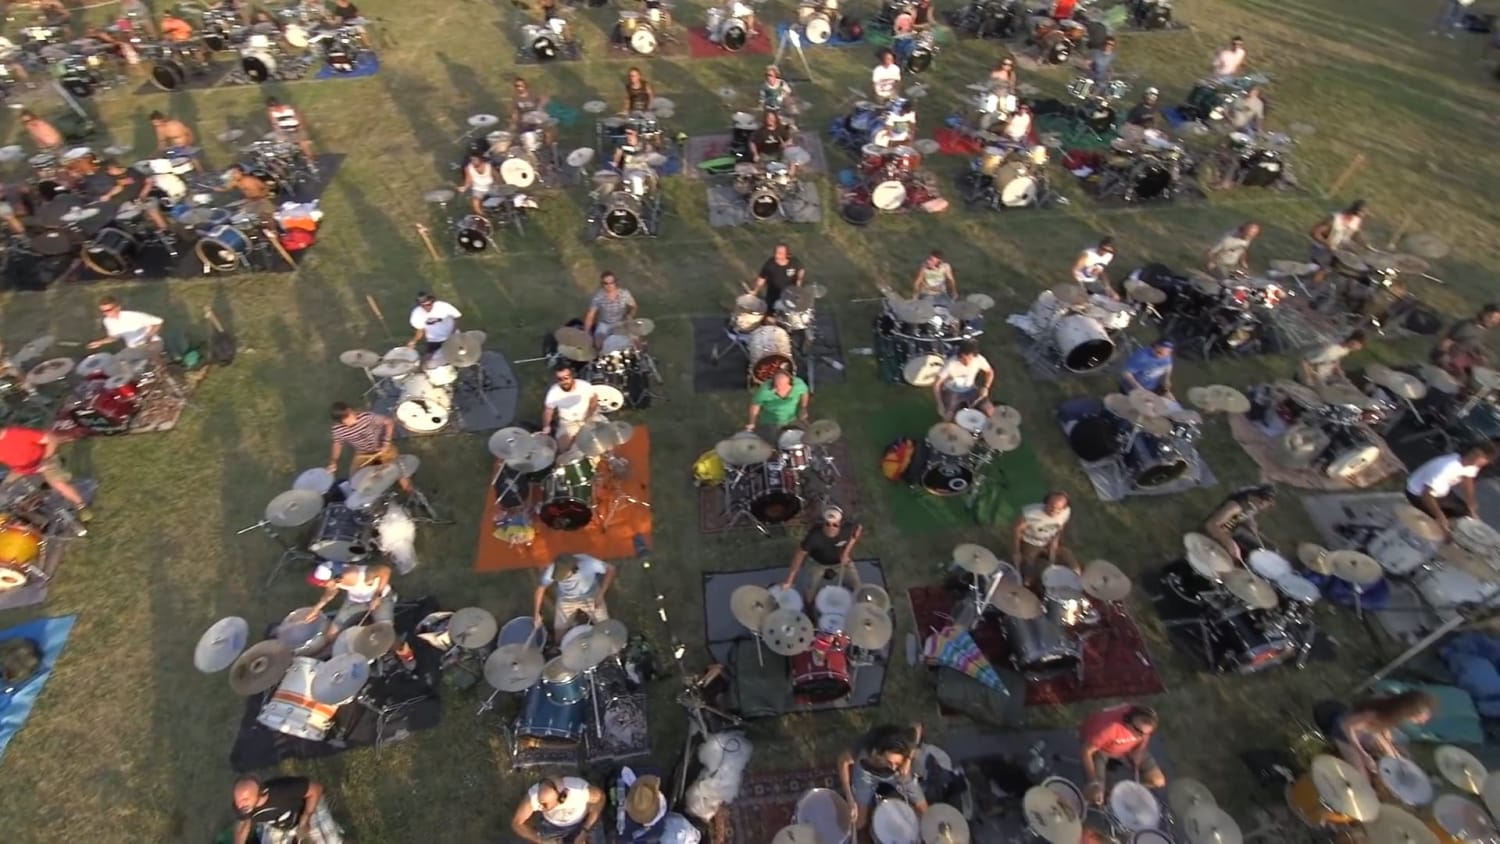 The Rockin' 1000 (a rock band comprising 1000 musicians) plays Learn to Fly by Foo Fighters to convince Dave Grohl to come and play in Cesena, Italy.